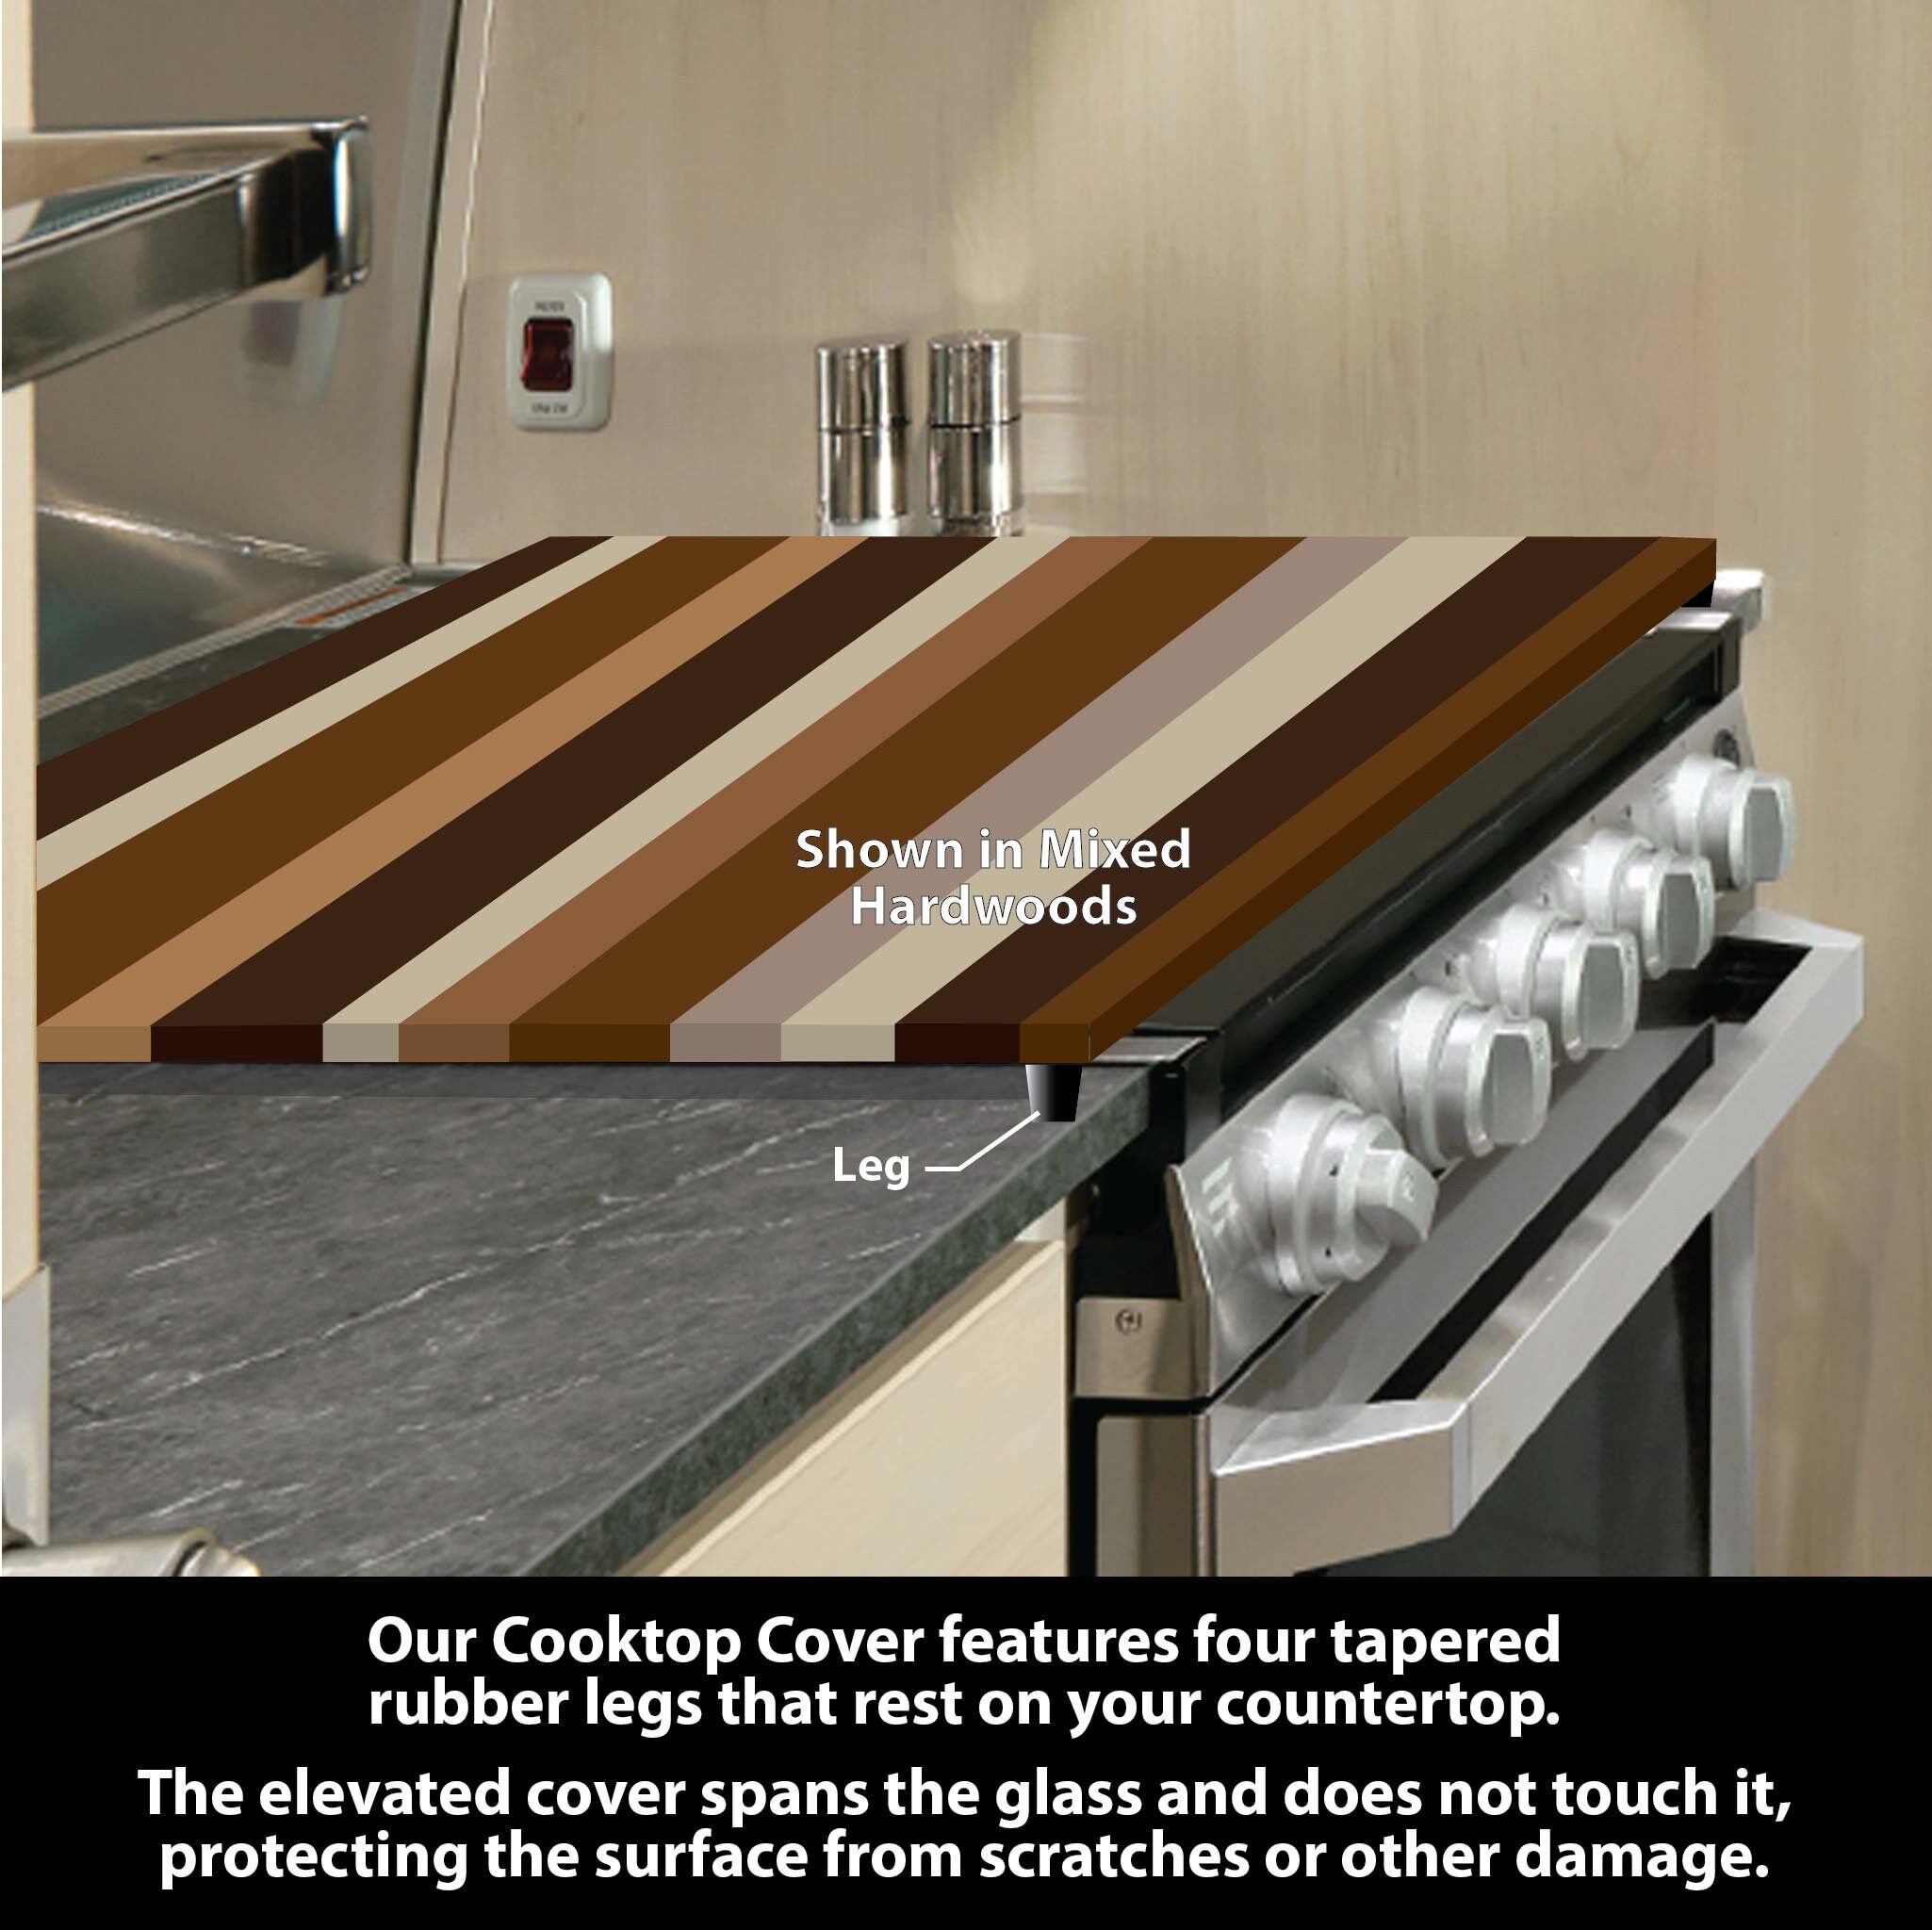 Wood Sink Cutting Boards for Pottery Barn Travel Trailers – Airstream  Supply Company